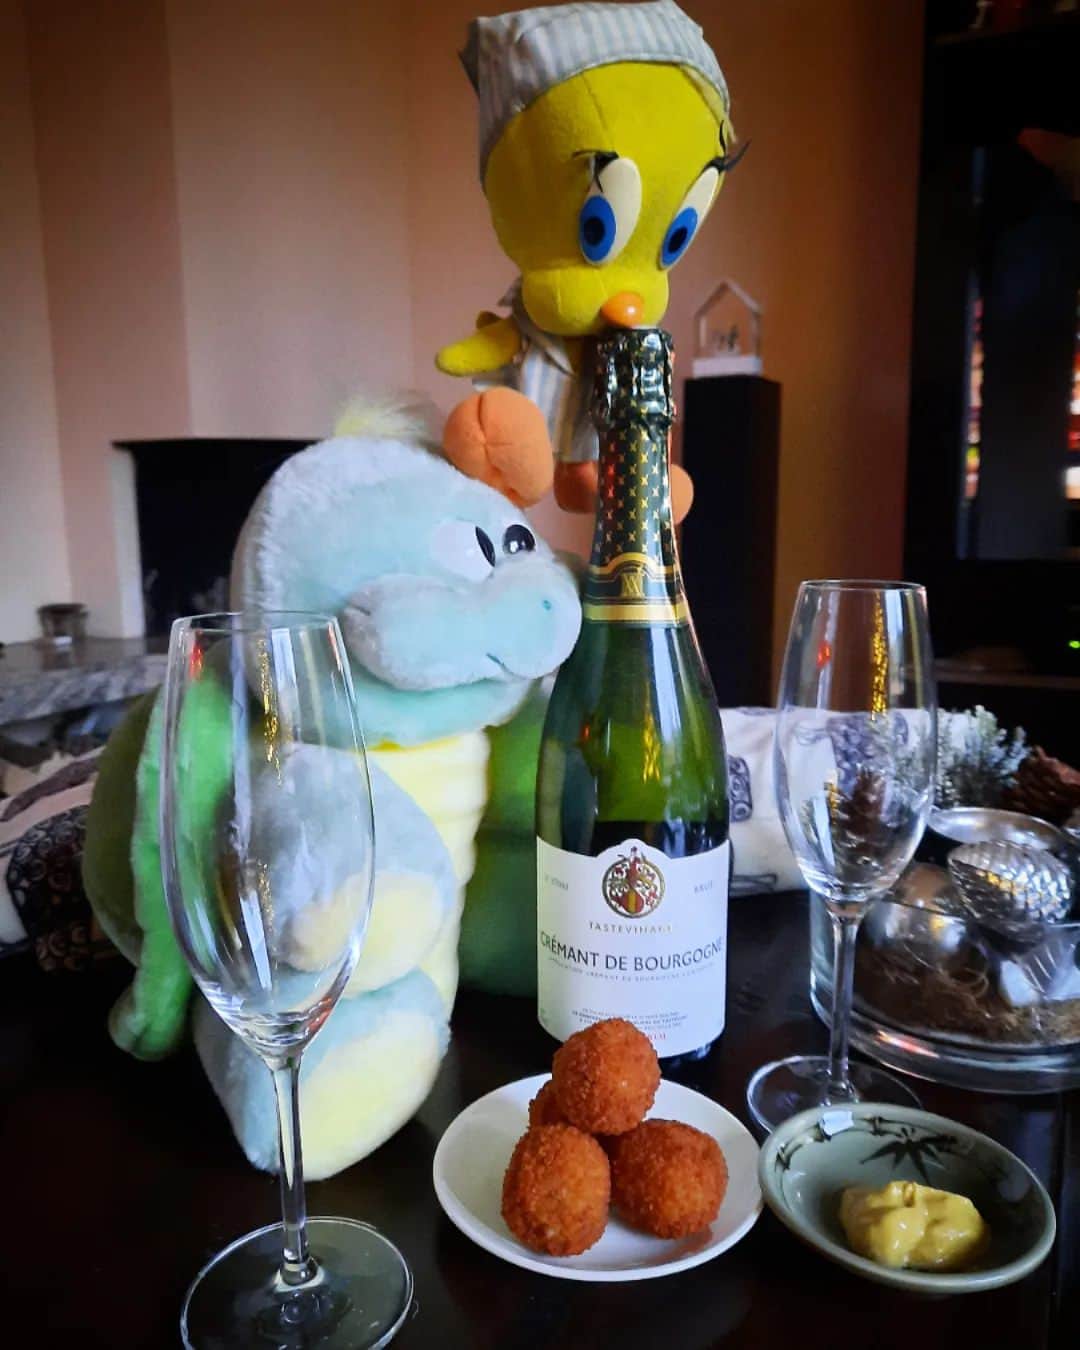 Little Yellow Birdのインスタグラム：「Quick, Jodocus, let's open up this bottle of bubbles!! The New Year is approaching!! We wish you all a wonderful, delicious, but most of all a healthy 2024!! #littleyellowbird #tweety #tweetykweelapis #adventures #yellow #bird #jodocus #greenturtle #newyear #oudjaarsavond #oudennieuw #bubbles #sparkles #drinks #happynewyear #debestewensen #2023 #2024 #stuffedanimalsofinstagram #plushiesofinstagram」